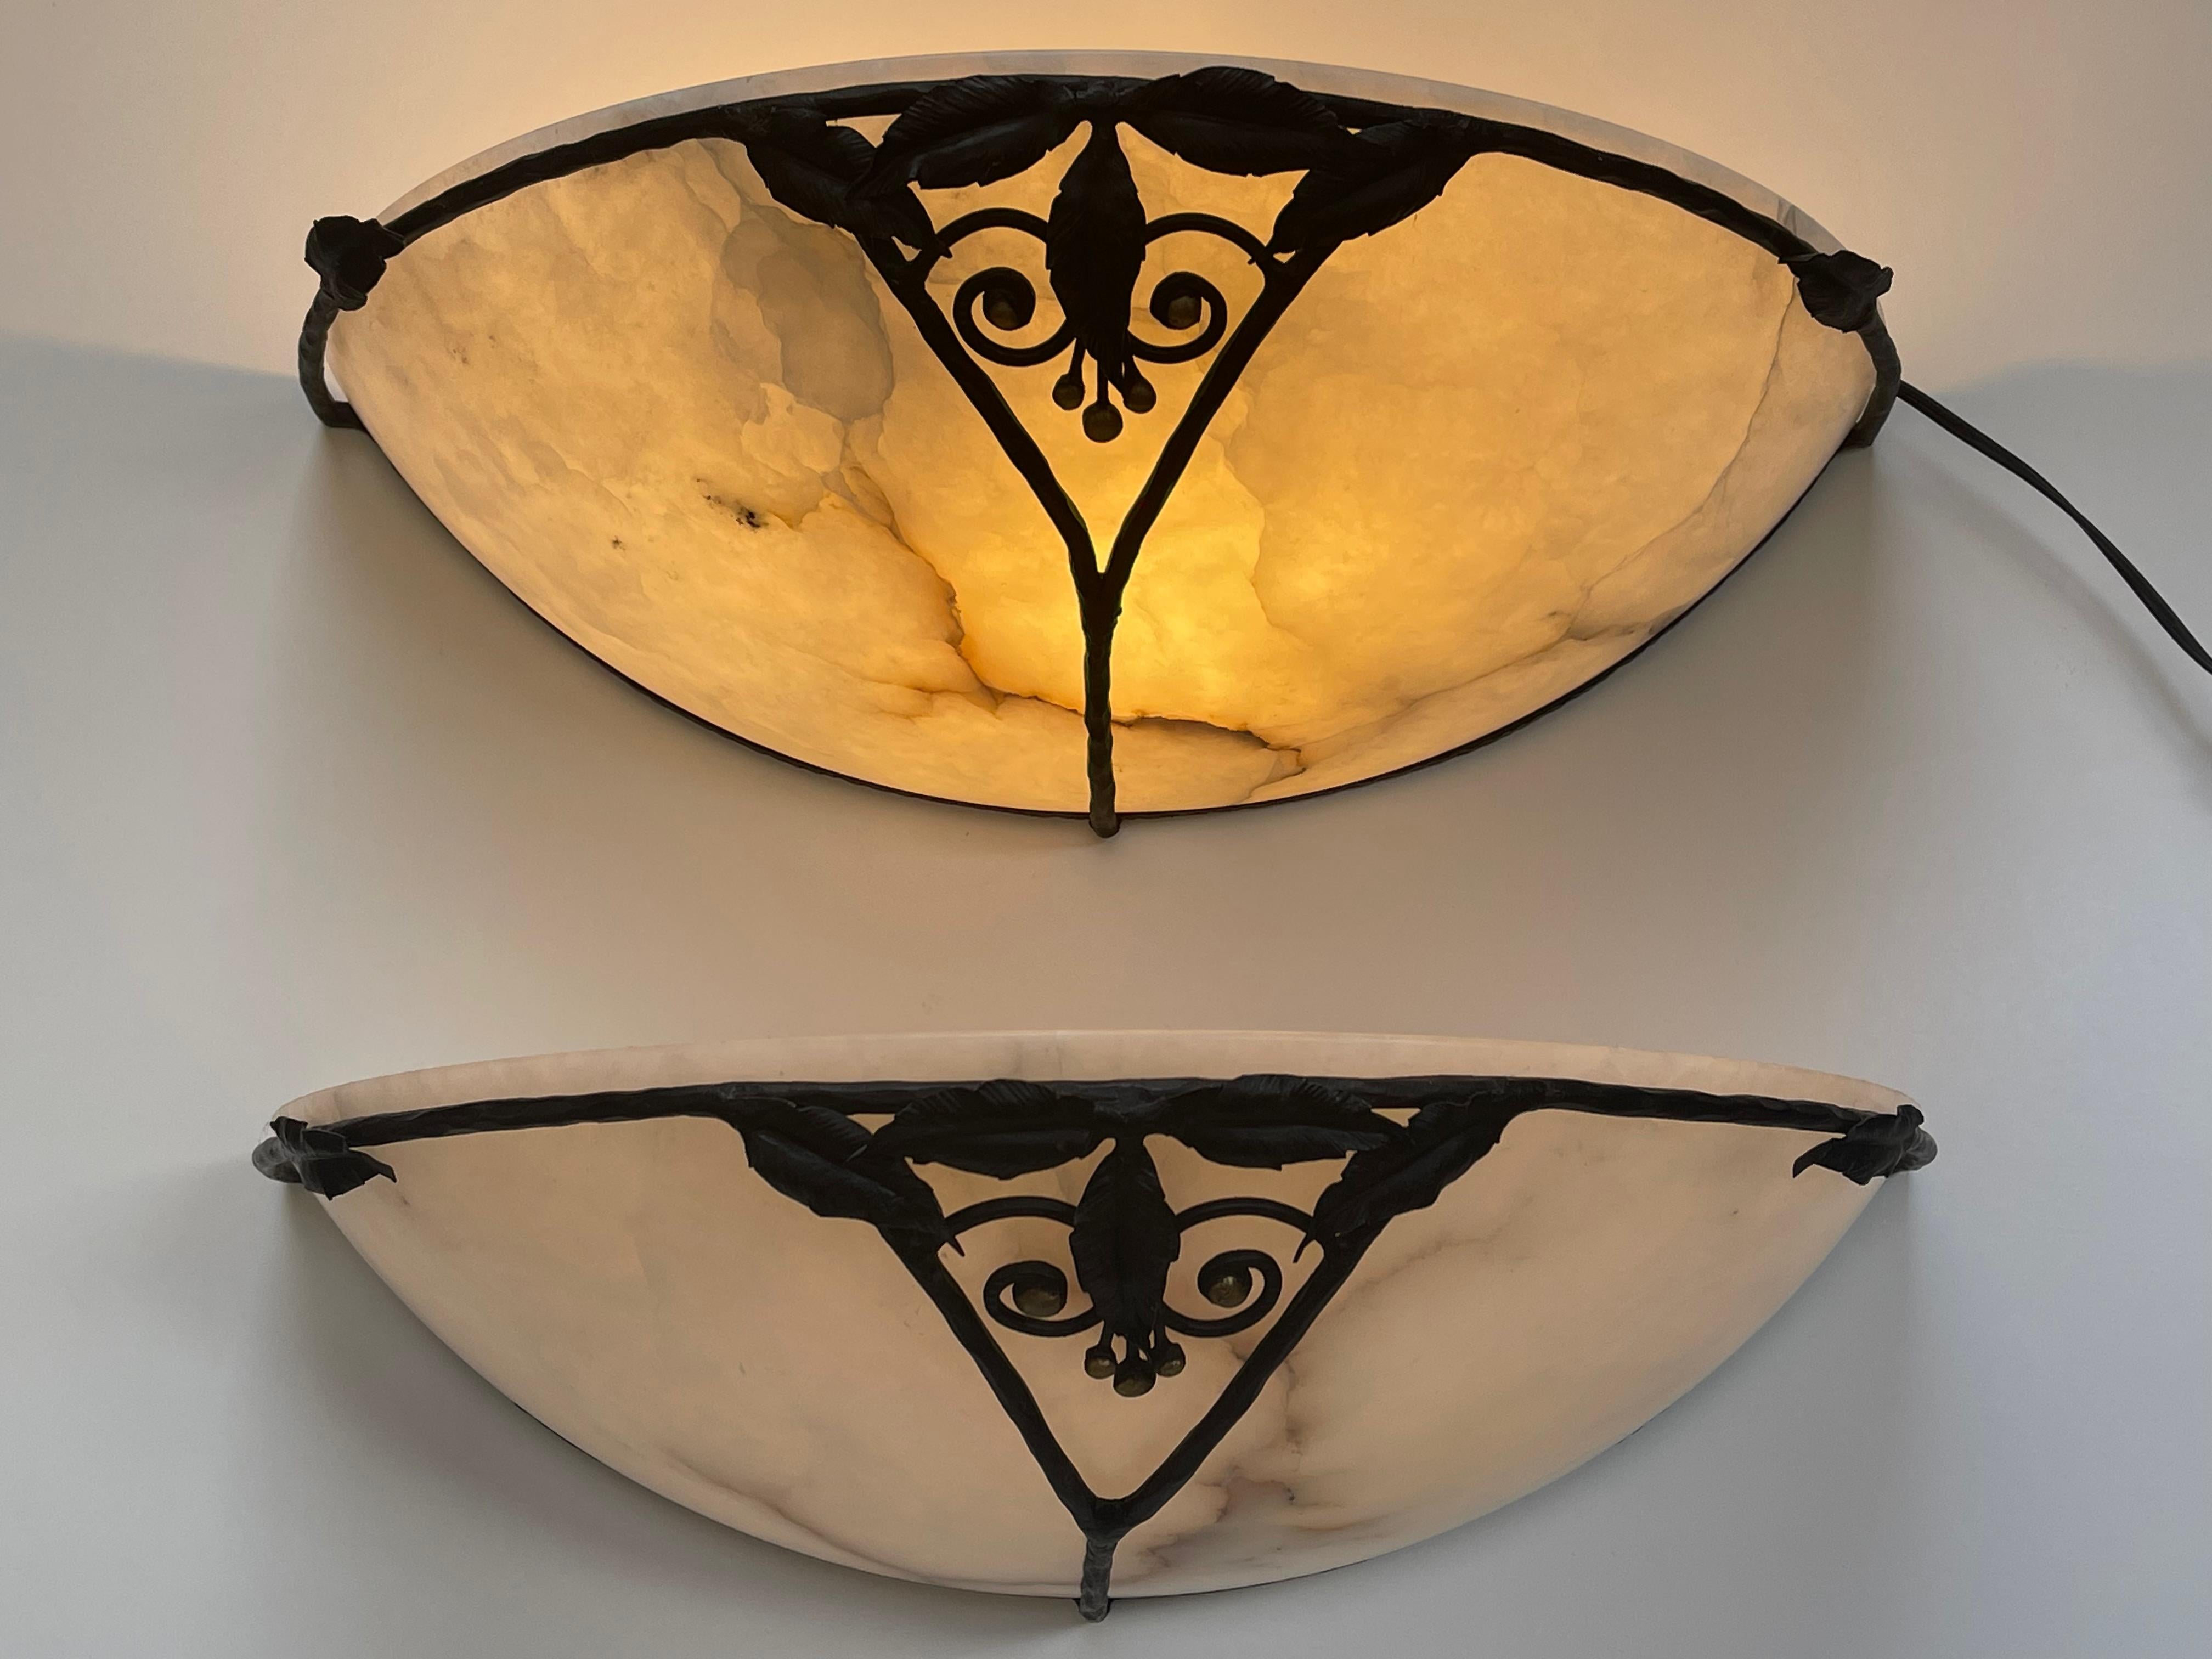 Pair of Art Deco Wrought Iron and Alabaster Sconces For Sale 2